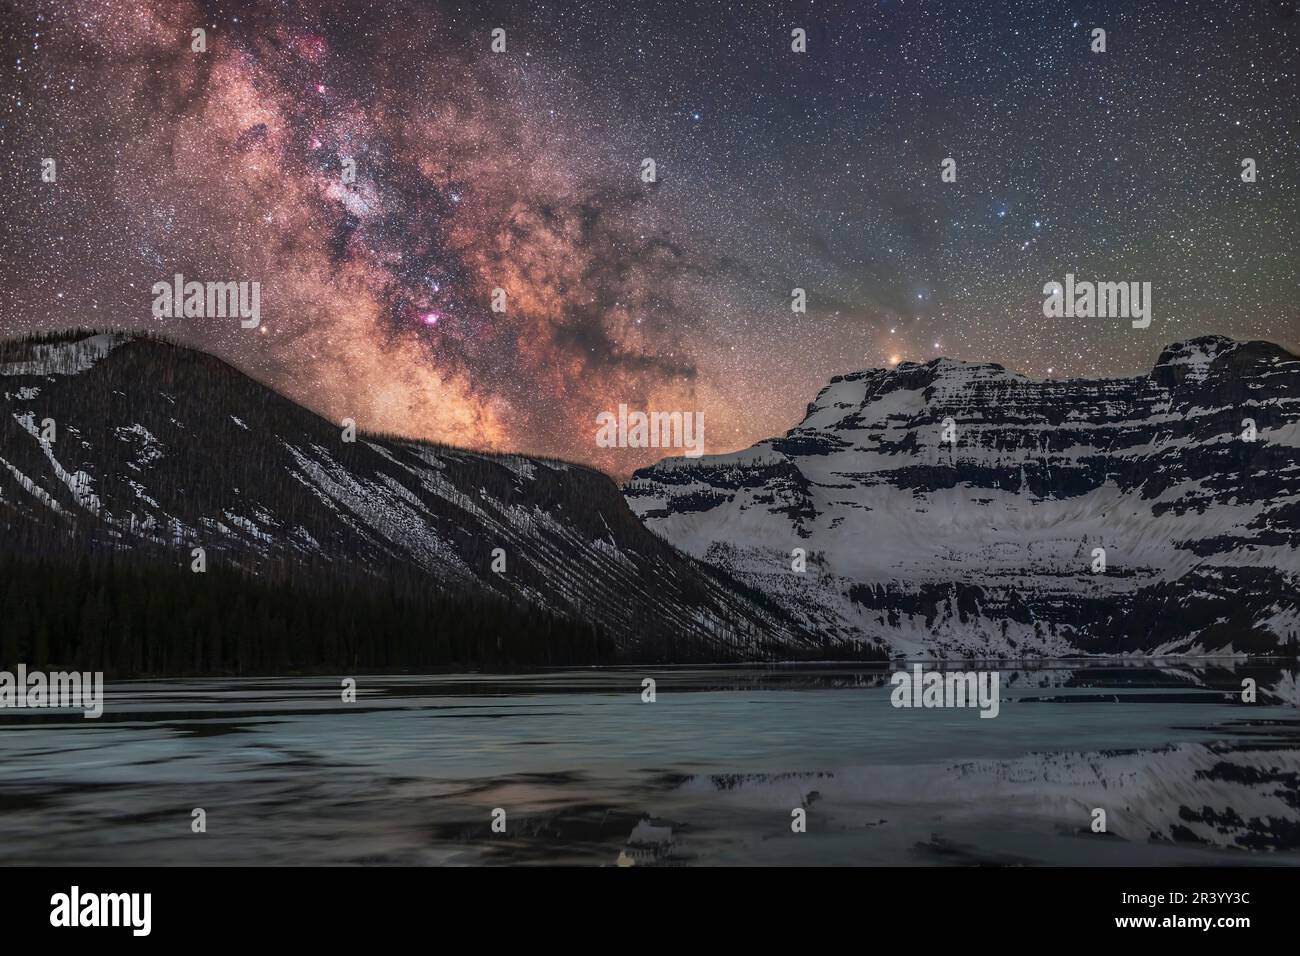 The Milky Way, with the star clouds of the galactic core over Cameron Lake in Alberta, Canada. Stock Photo